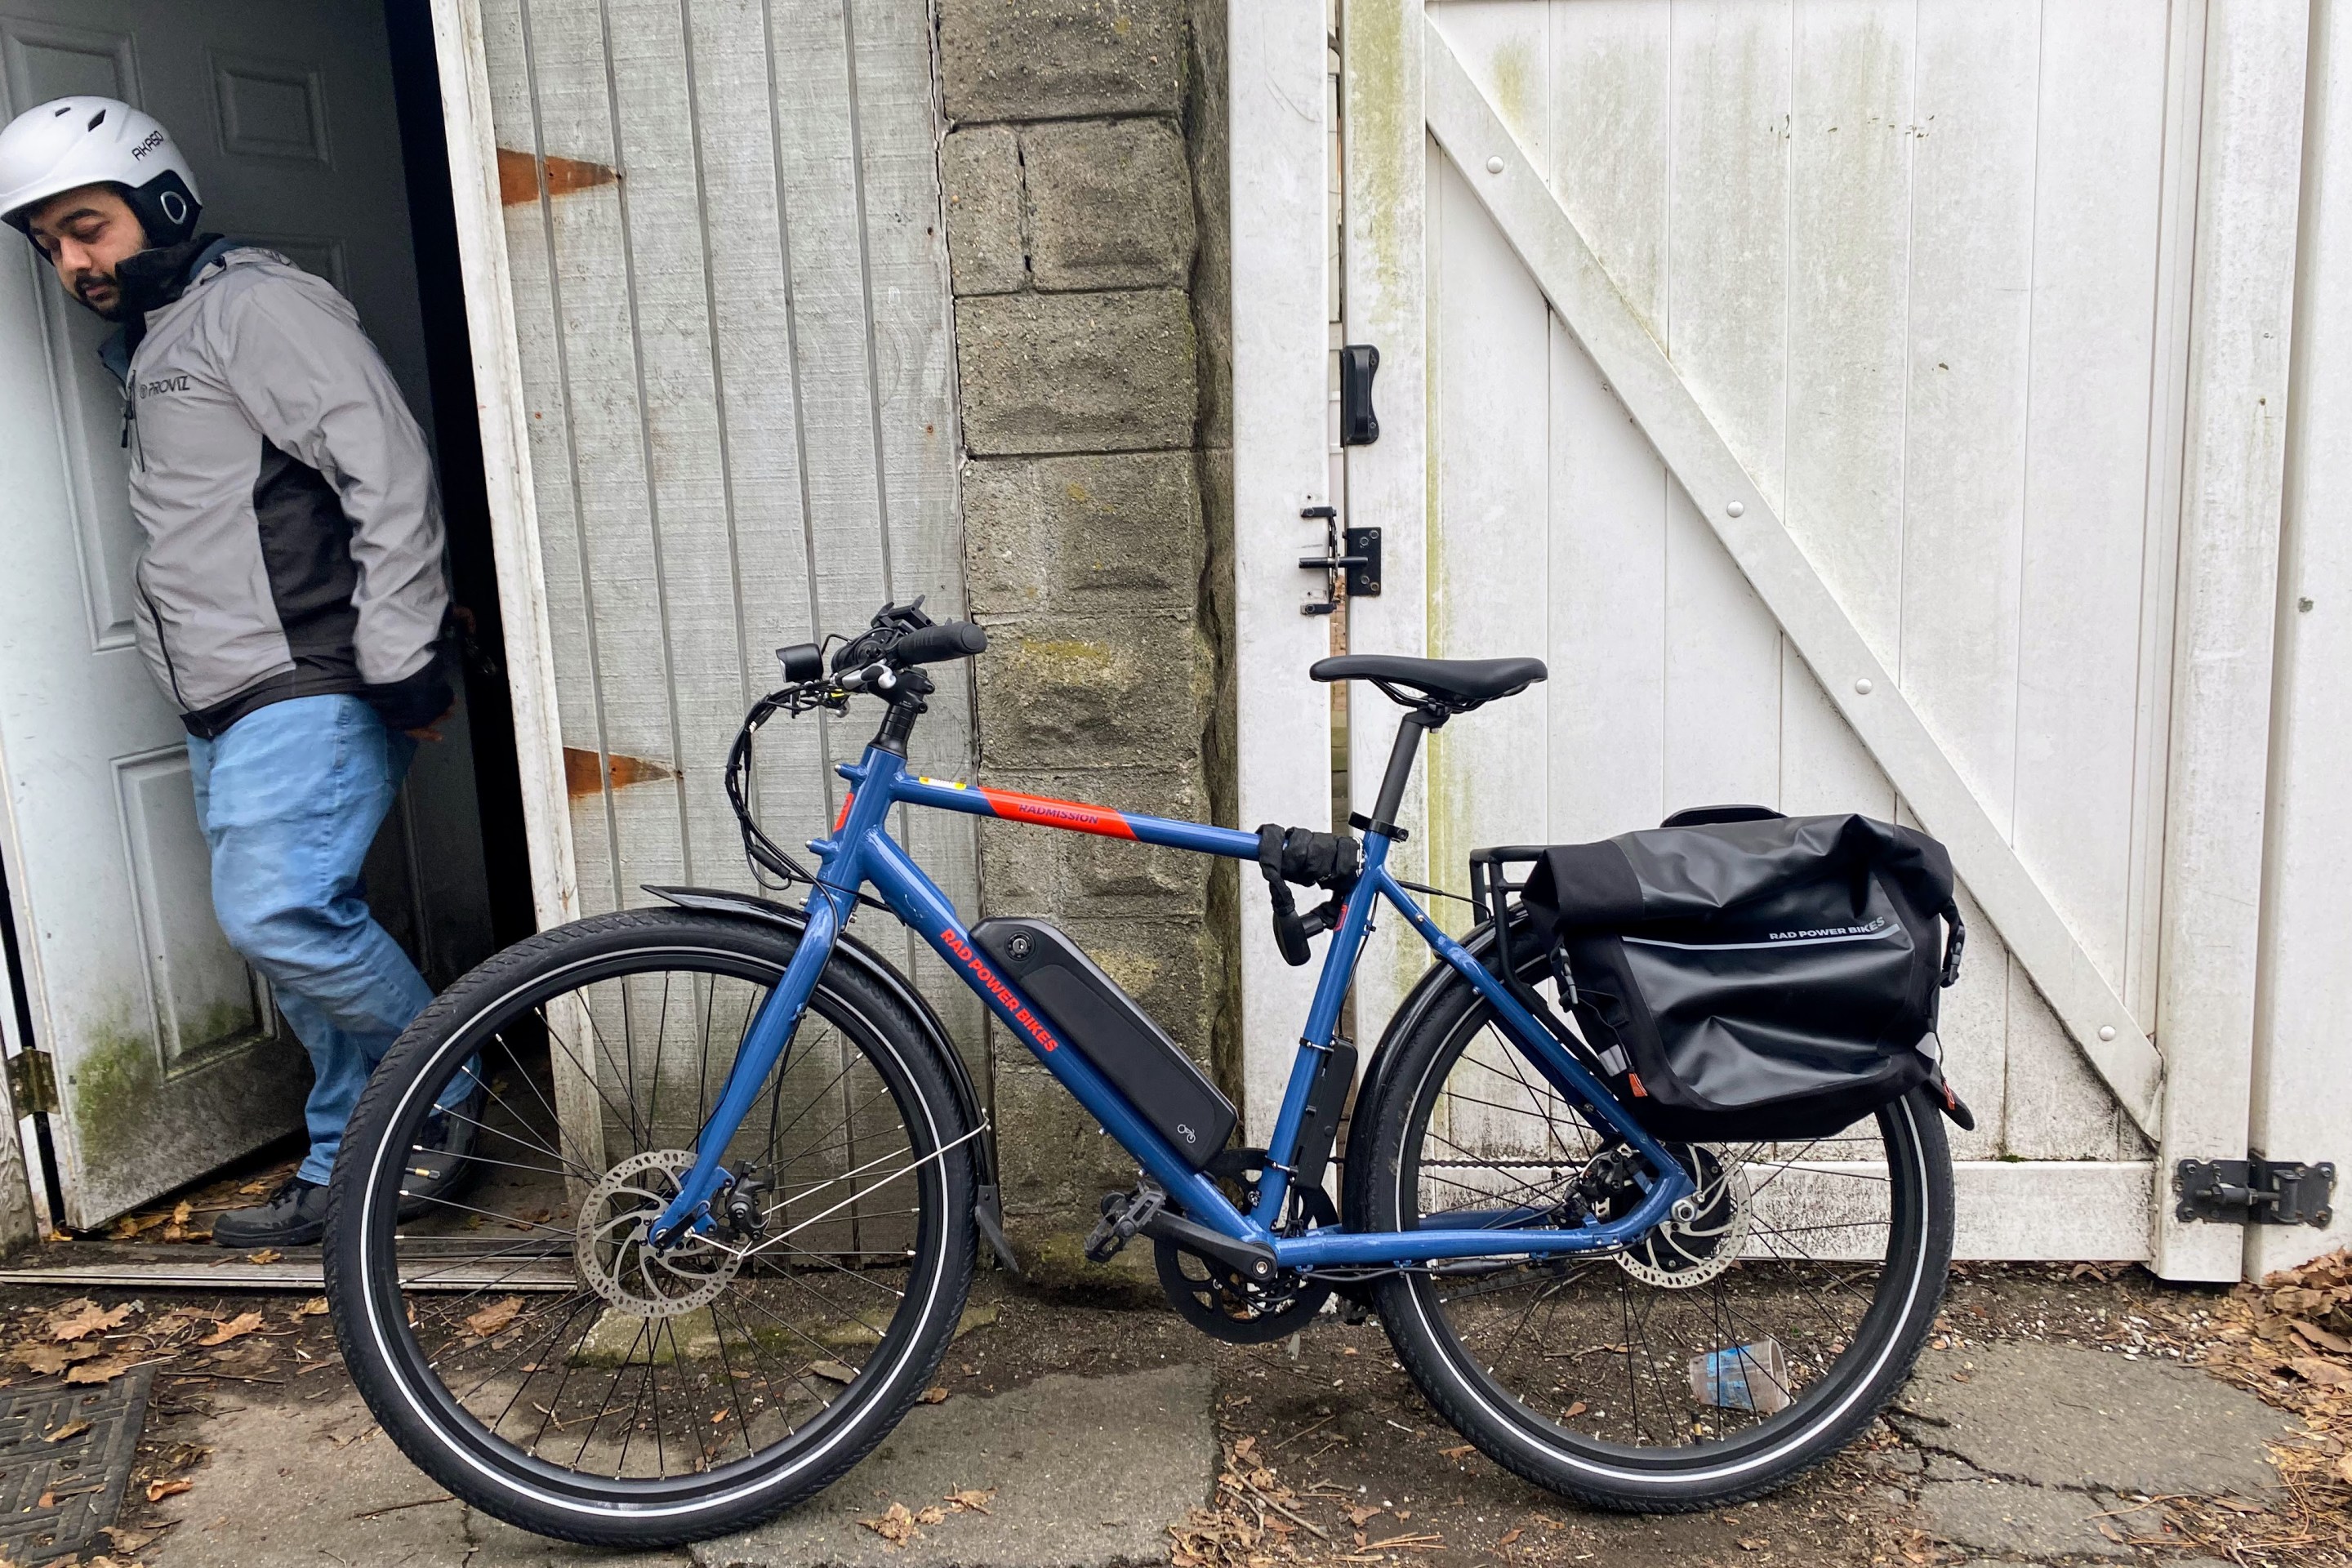 Deodhar's e-bike leans against the wall as he exits the storage shed.